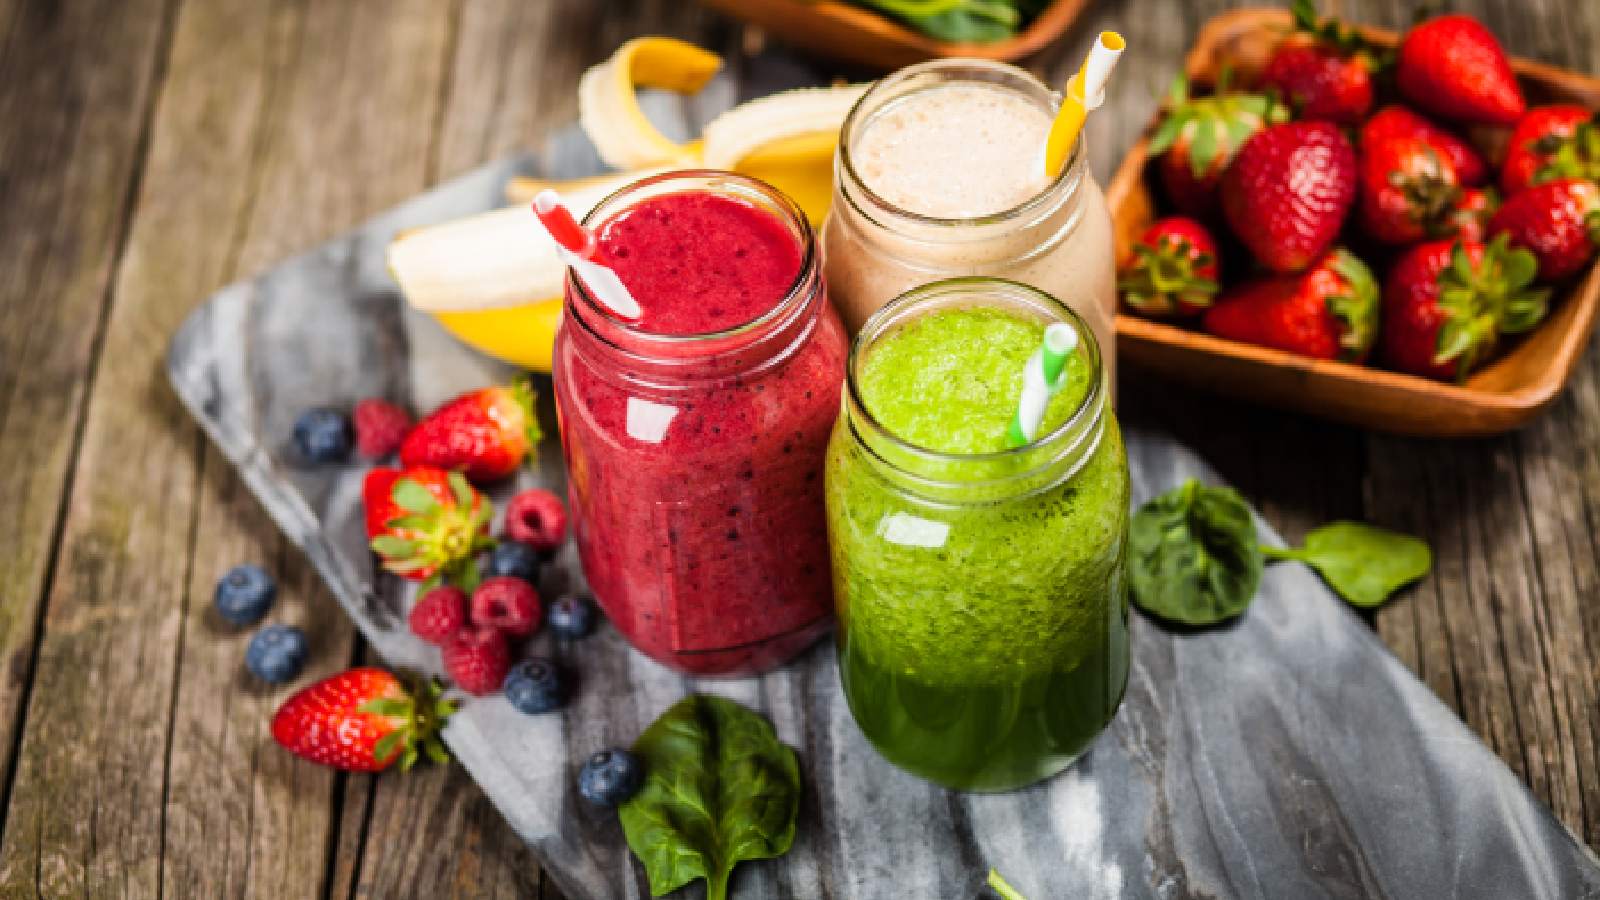 6 best smoothie recipes for winter to keep you healthy and full